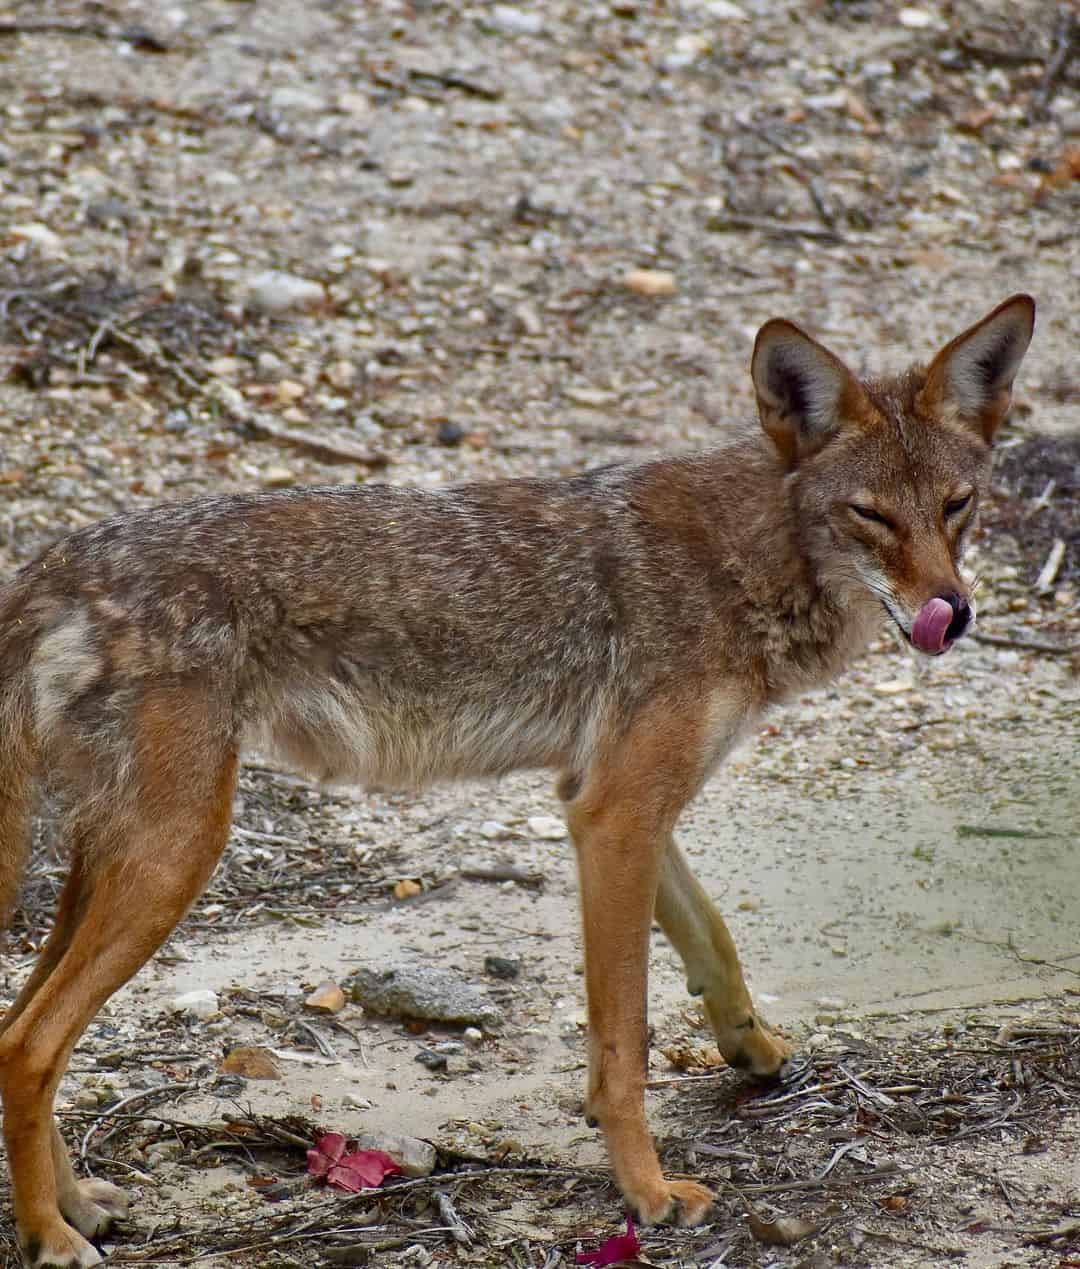 When Are Coyotes Most Active?